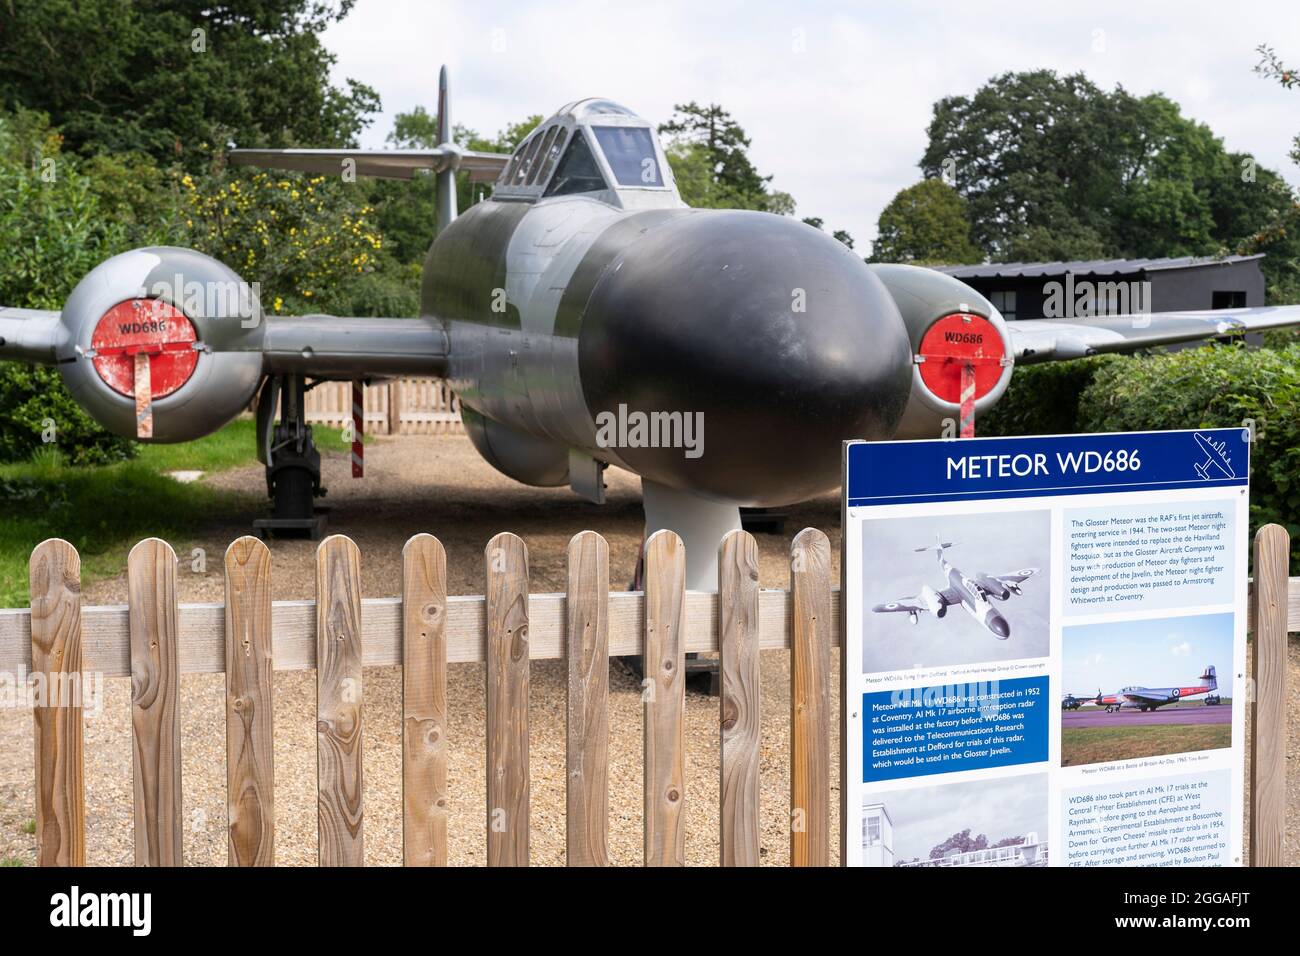 The last plane to fly out of Defford Airfield was the Gloster Meteor NF Mark 11 night fighter WD686. The aircraft is pictured at Defford Airfield, UK Stock Photo